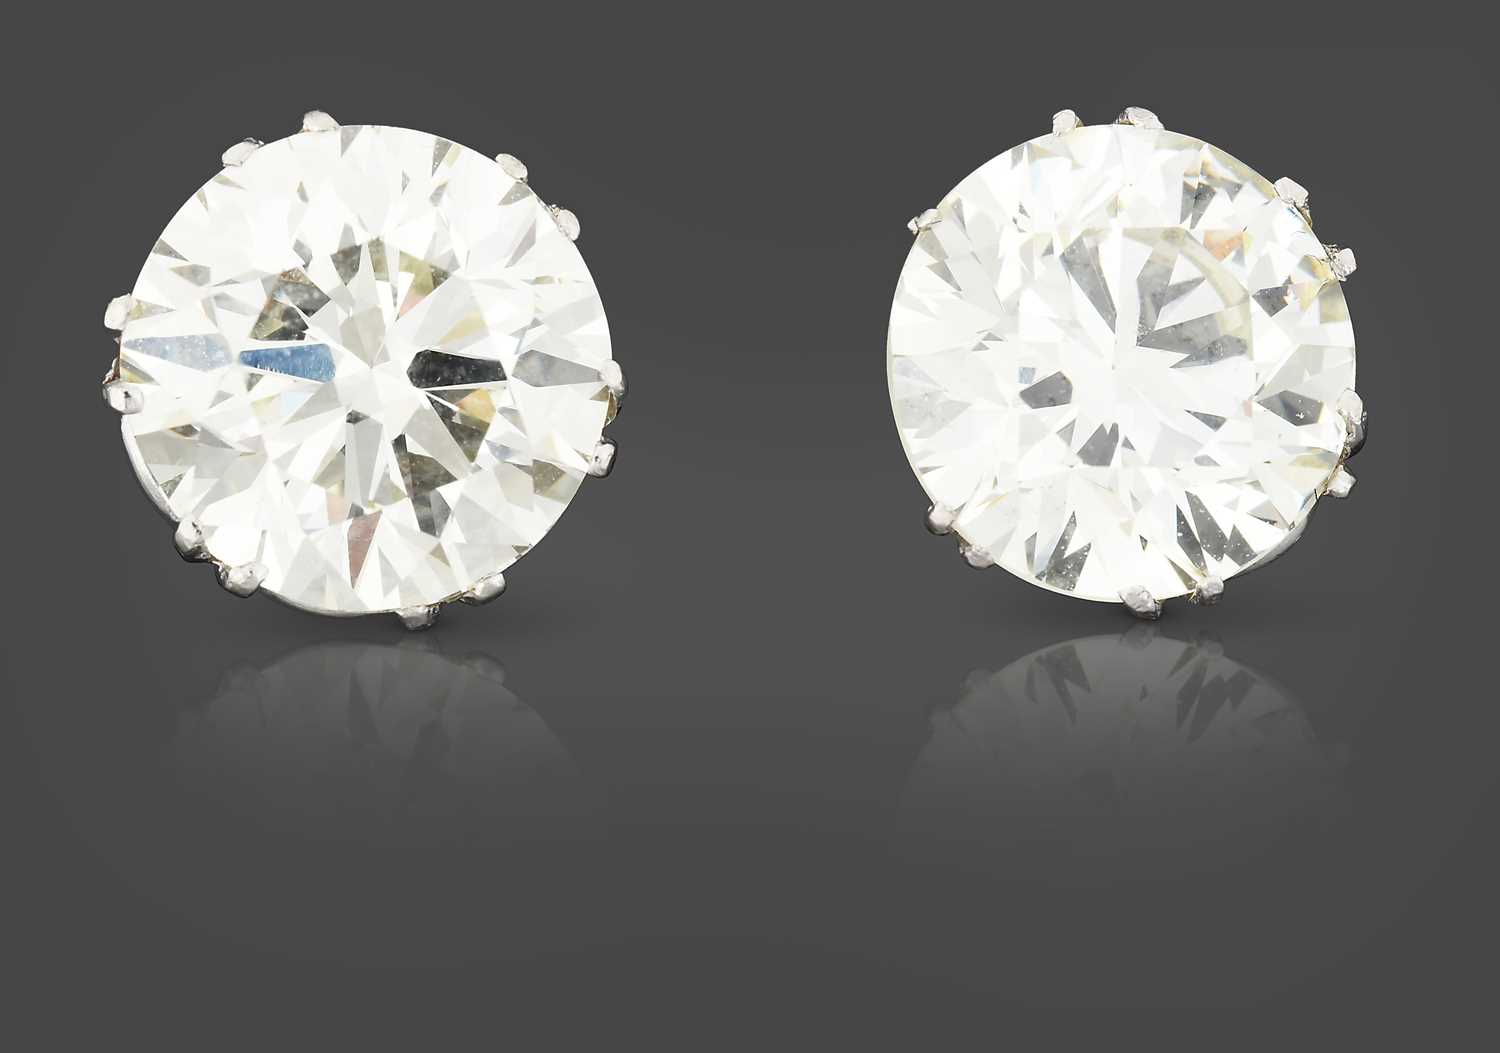 Lot 2350 - A Pair of Diamond Solitaire Earrings